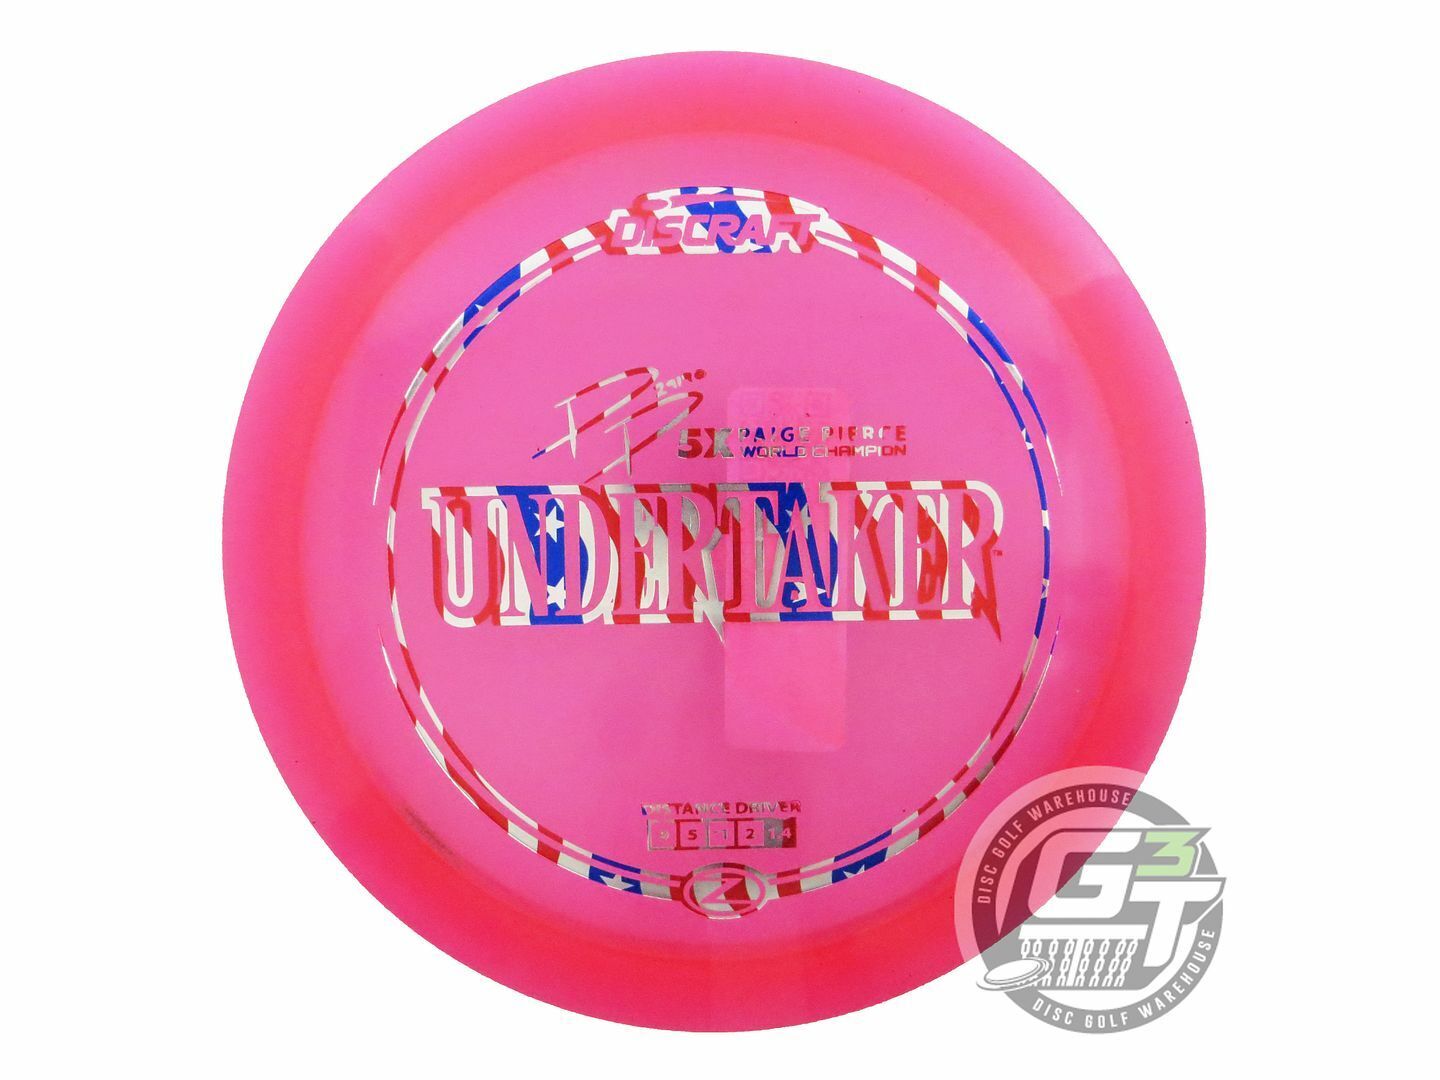 Discraft Elite Z Undertaker [Paige Pierce 5X] Distance Driver Golf Disc (Individually Listed)